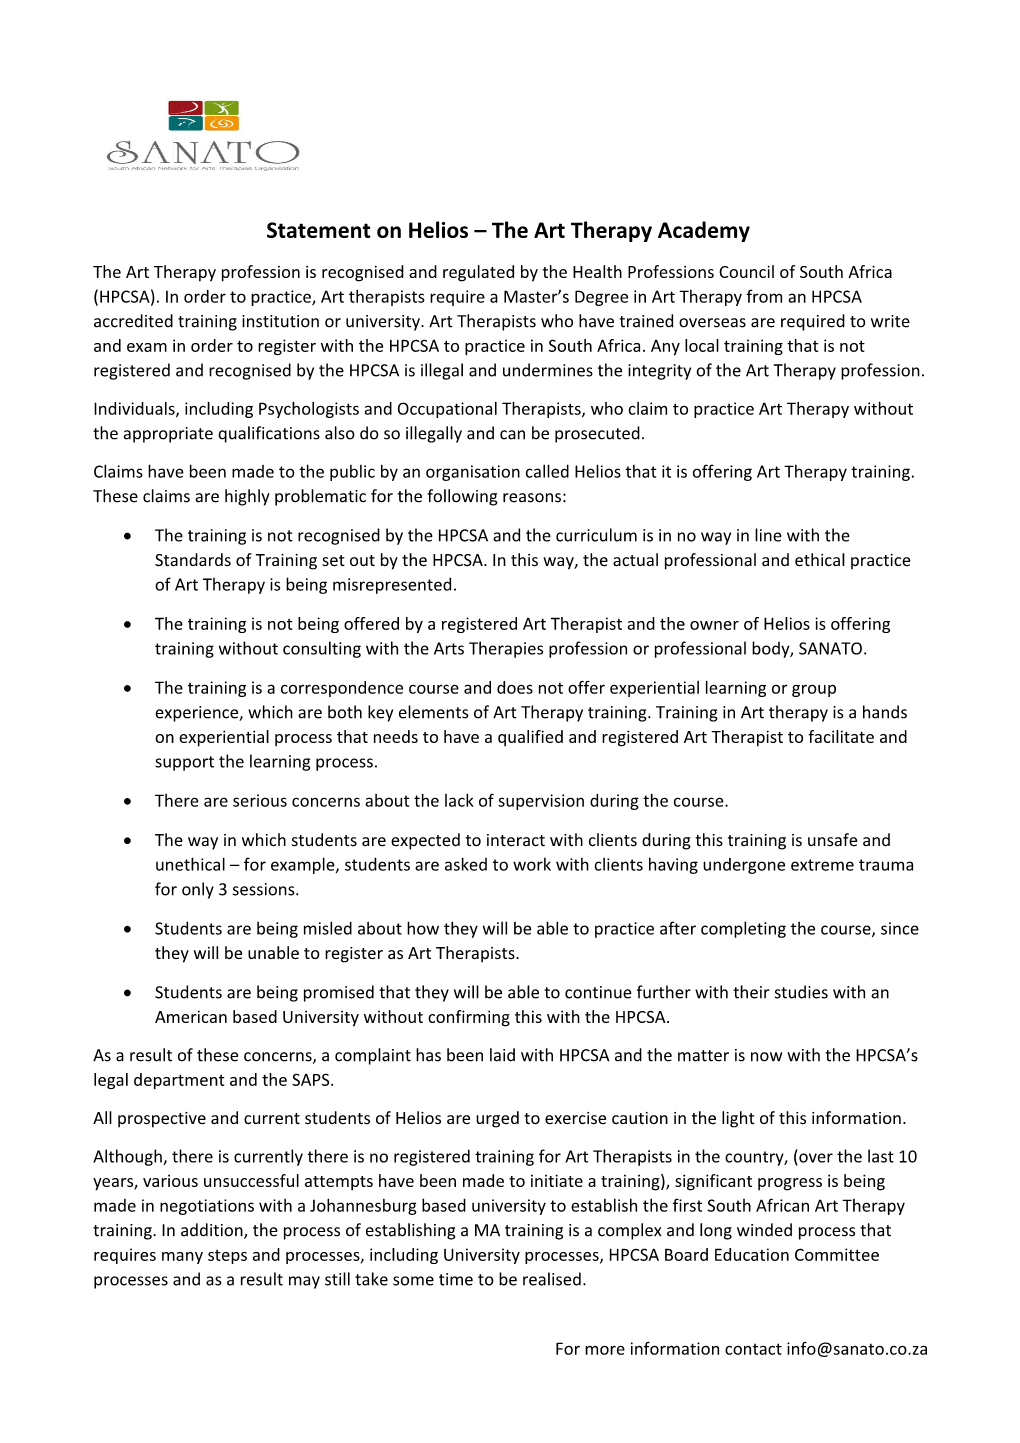 Statement on Helios the Art Therapy Academy